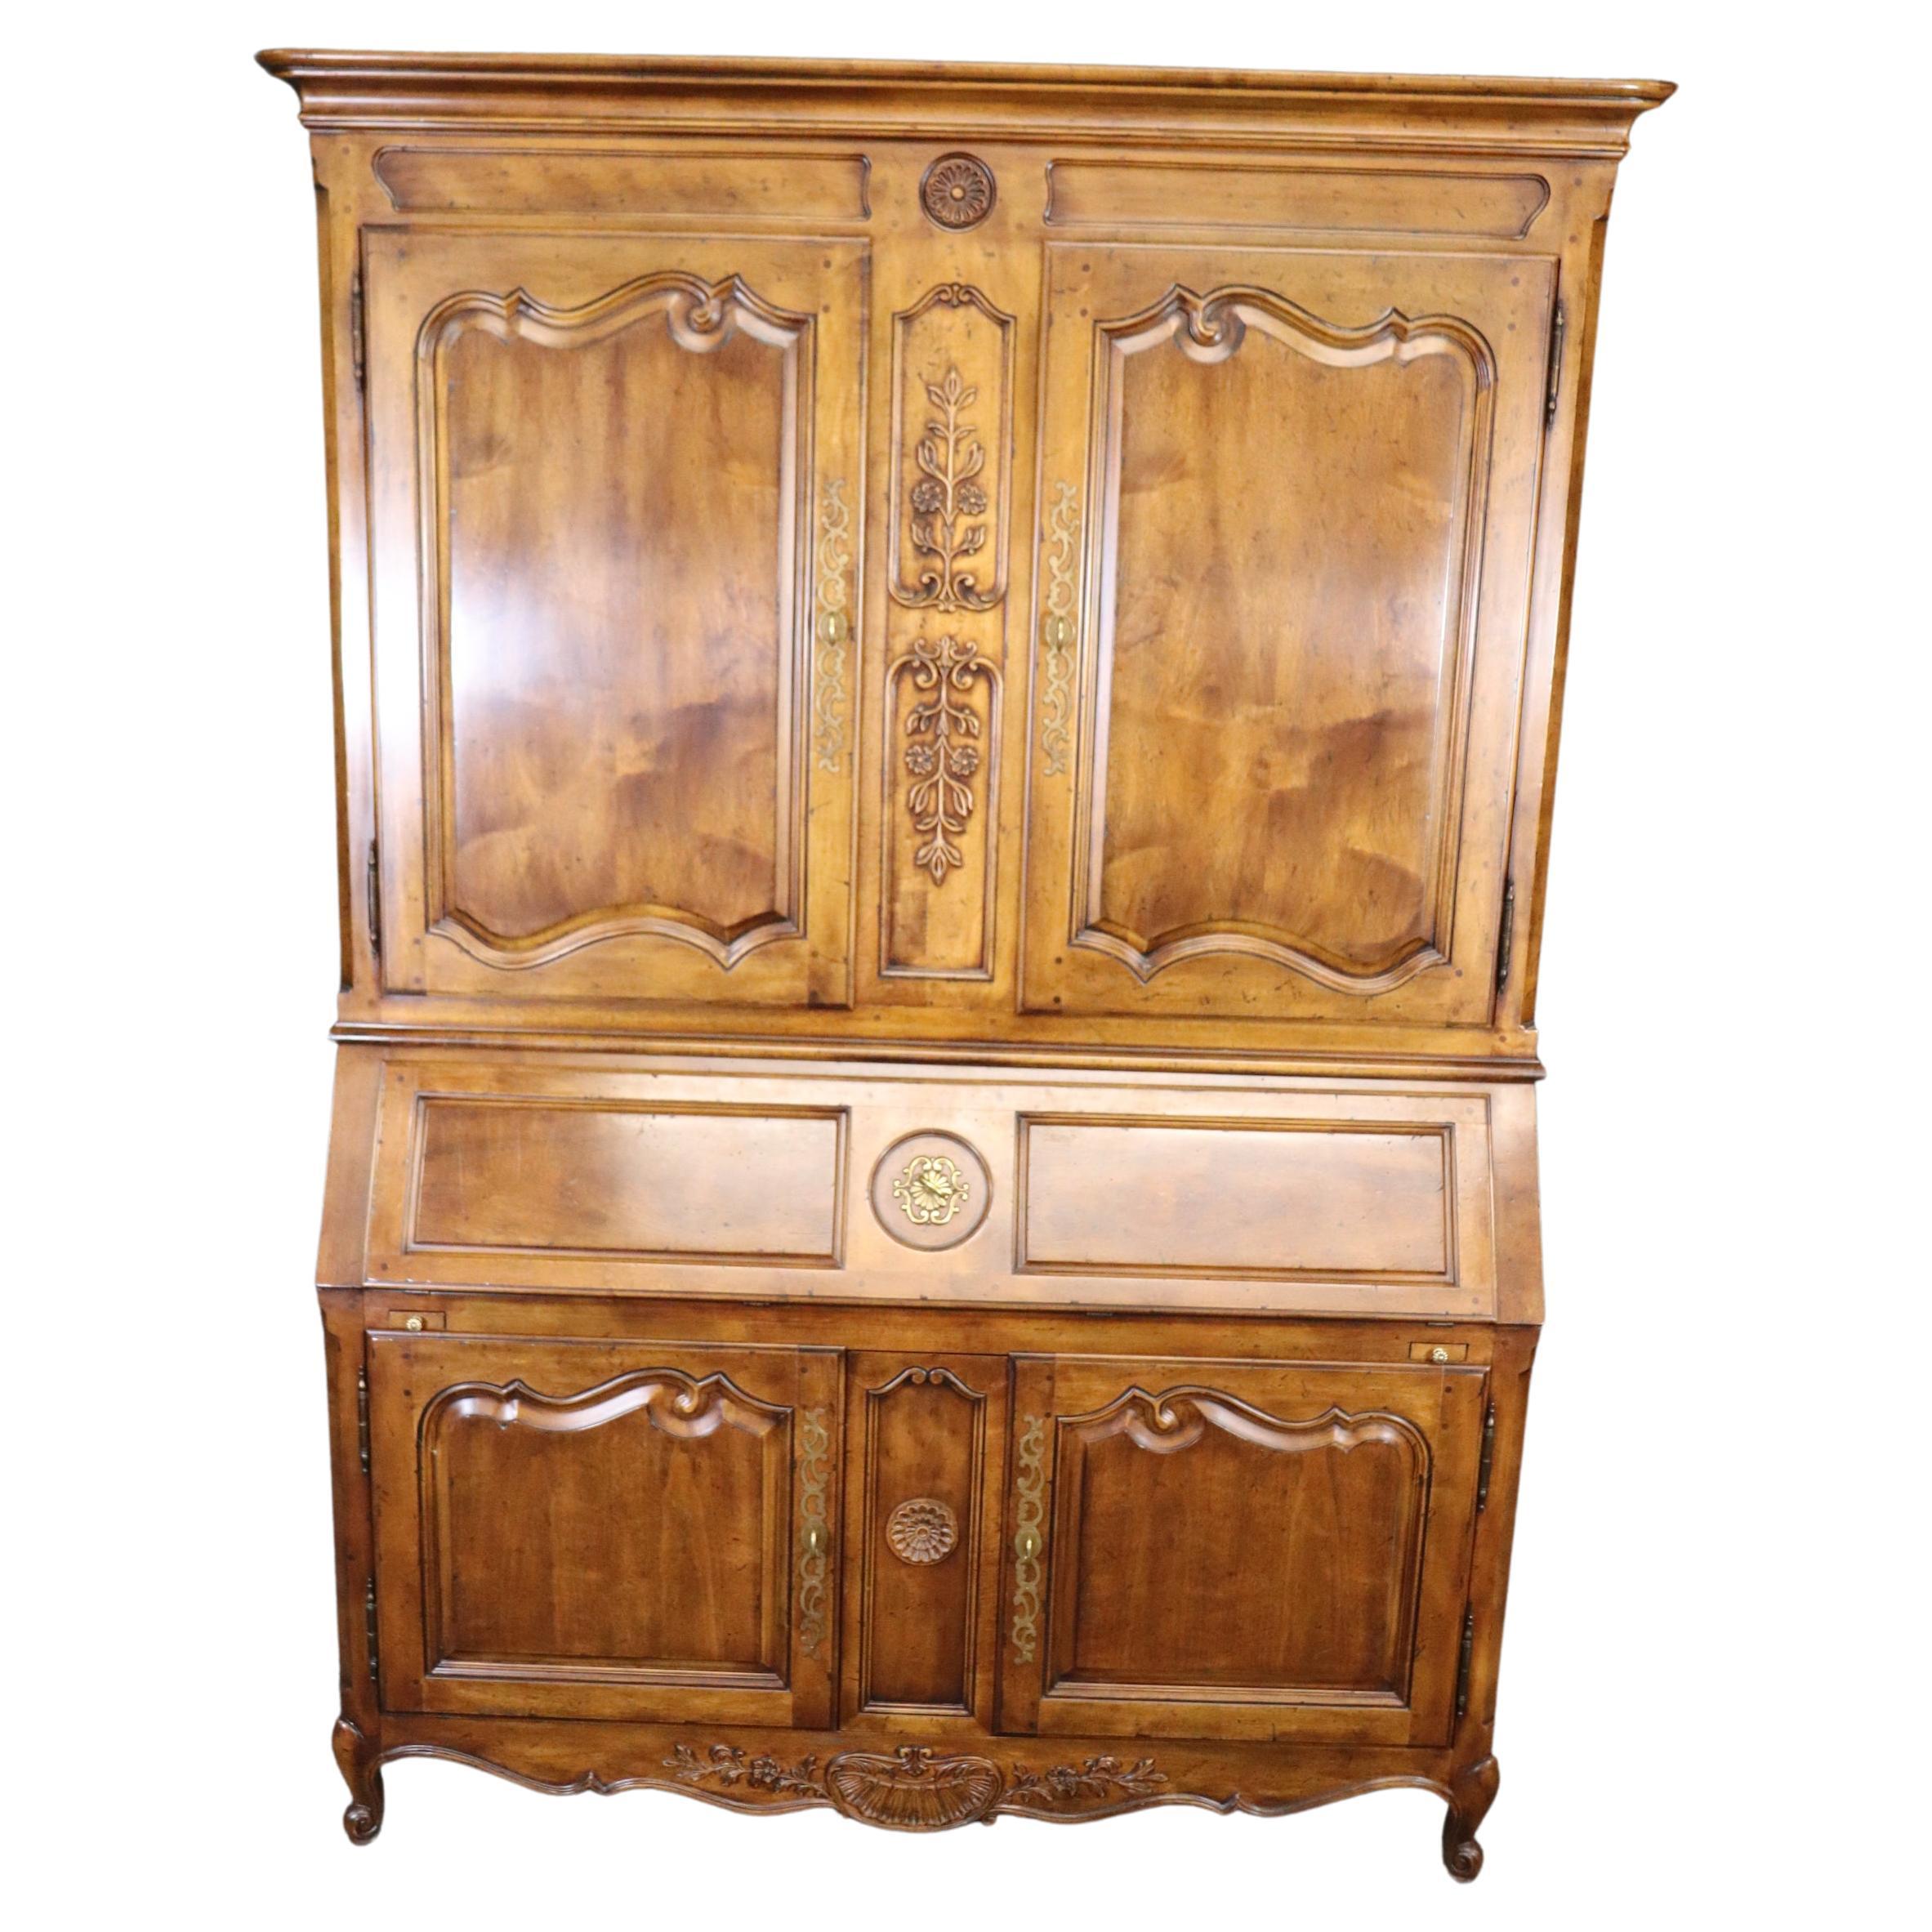 Heredon Country French Carved Walnut Lighted China Cabinet Breakfront with Desk For Sale